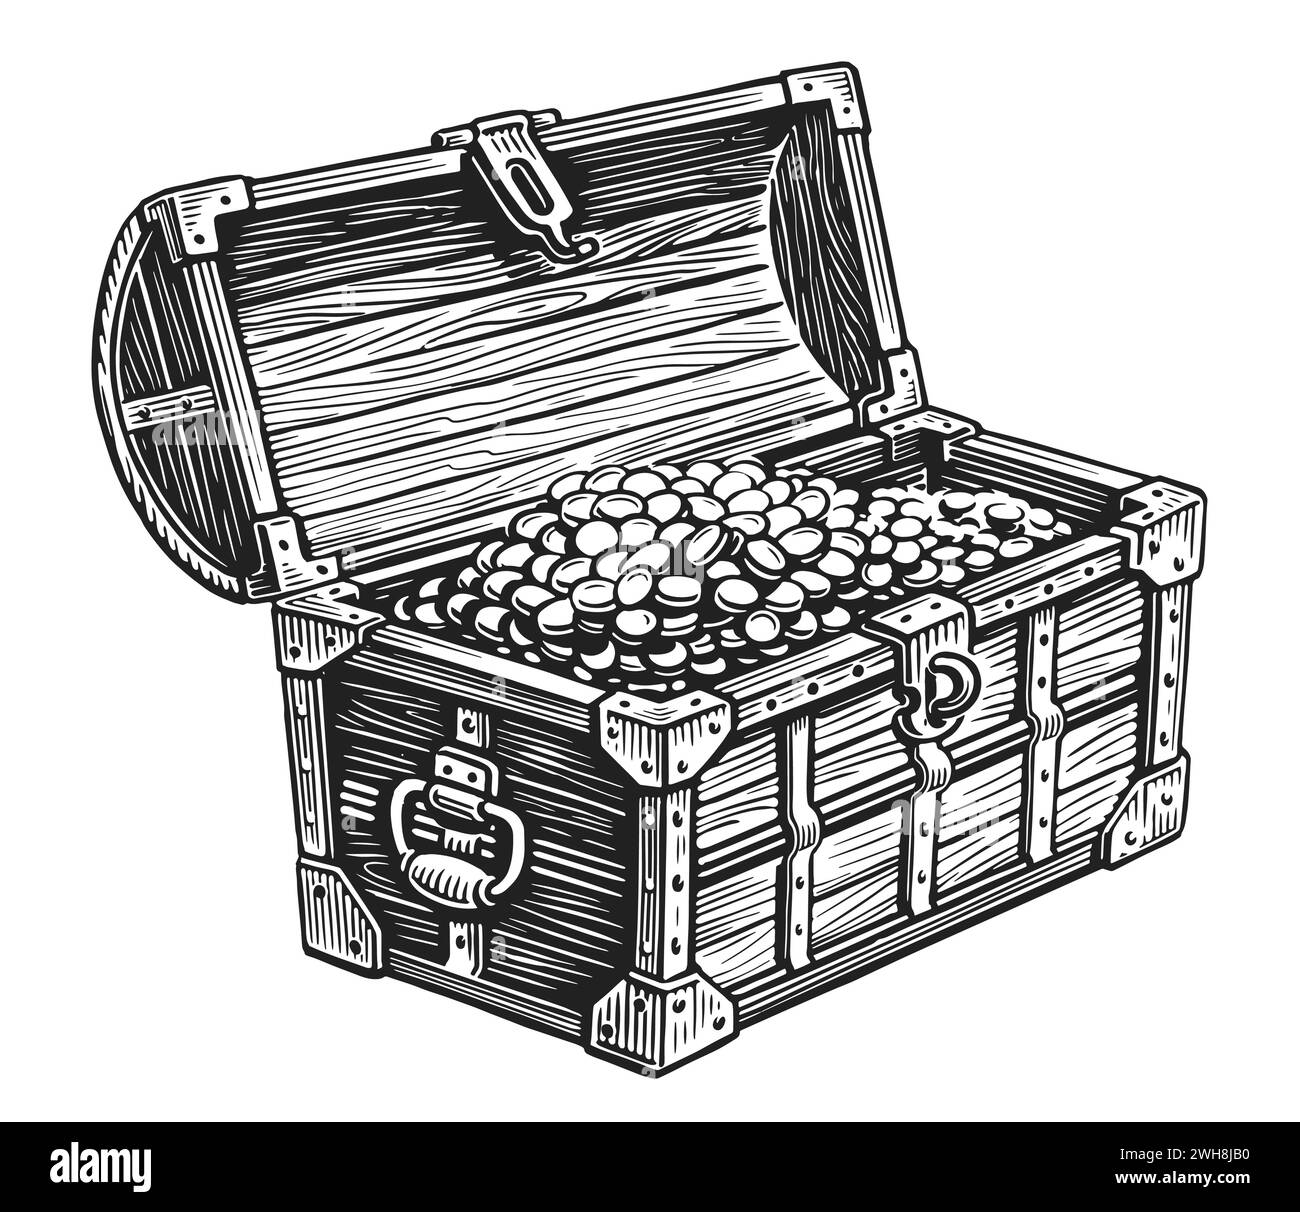 Wooden pirate chest full of treasures of gold coins. Hand drawn sketch vector illustration Stock Vector